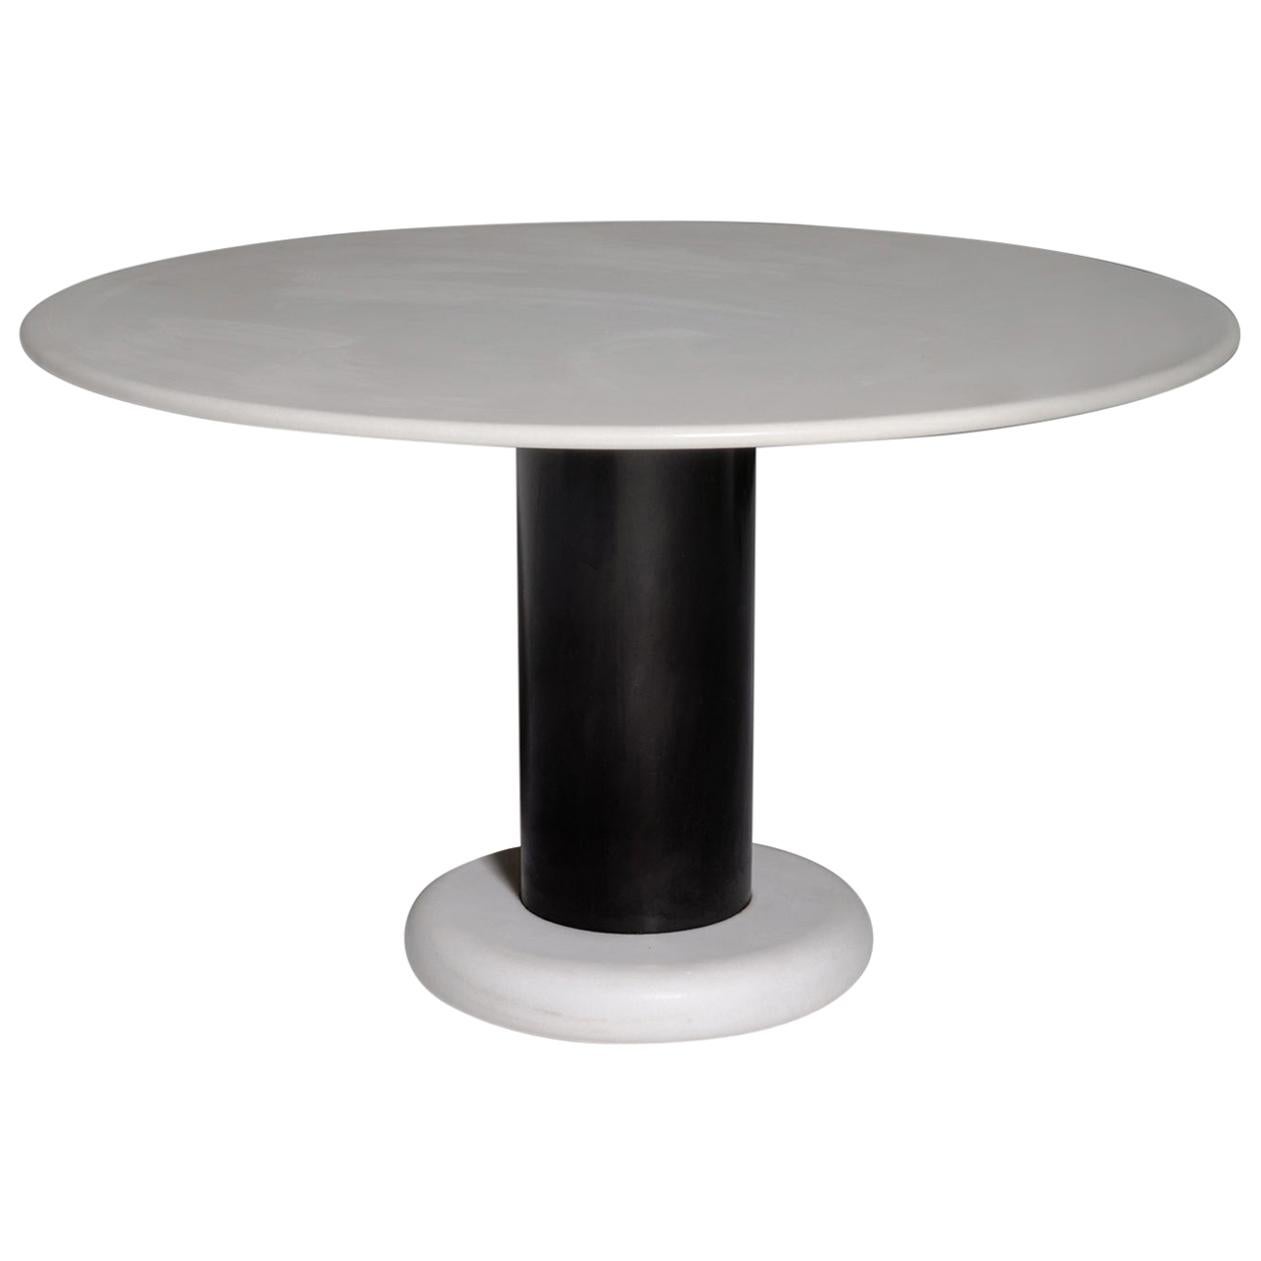 Ettore Sottsass ‘Lotto Rosso’ round Marble Table for Poltronova, Italy 1